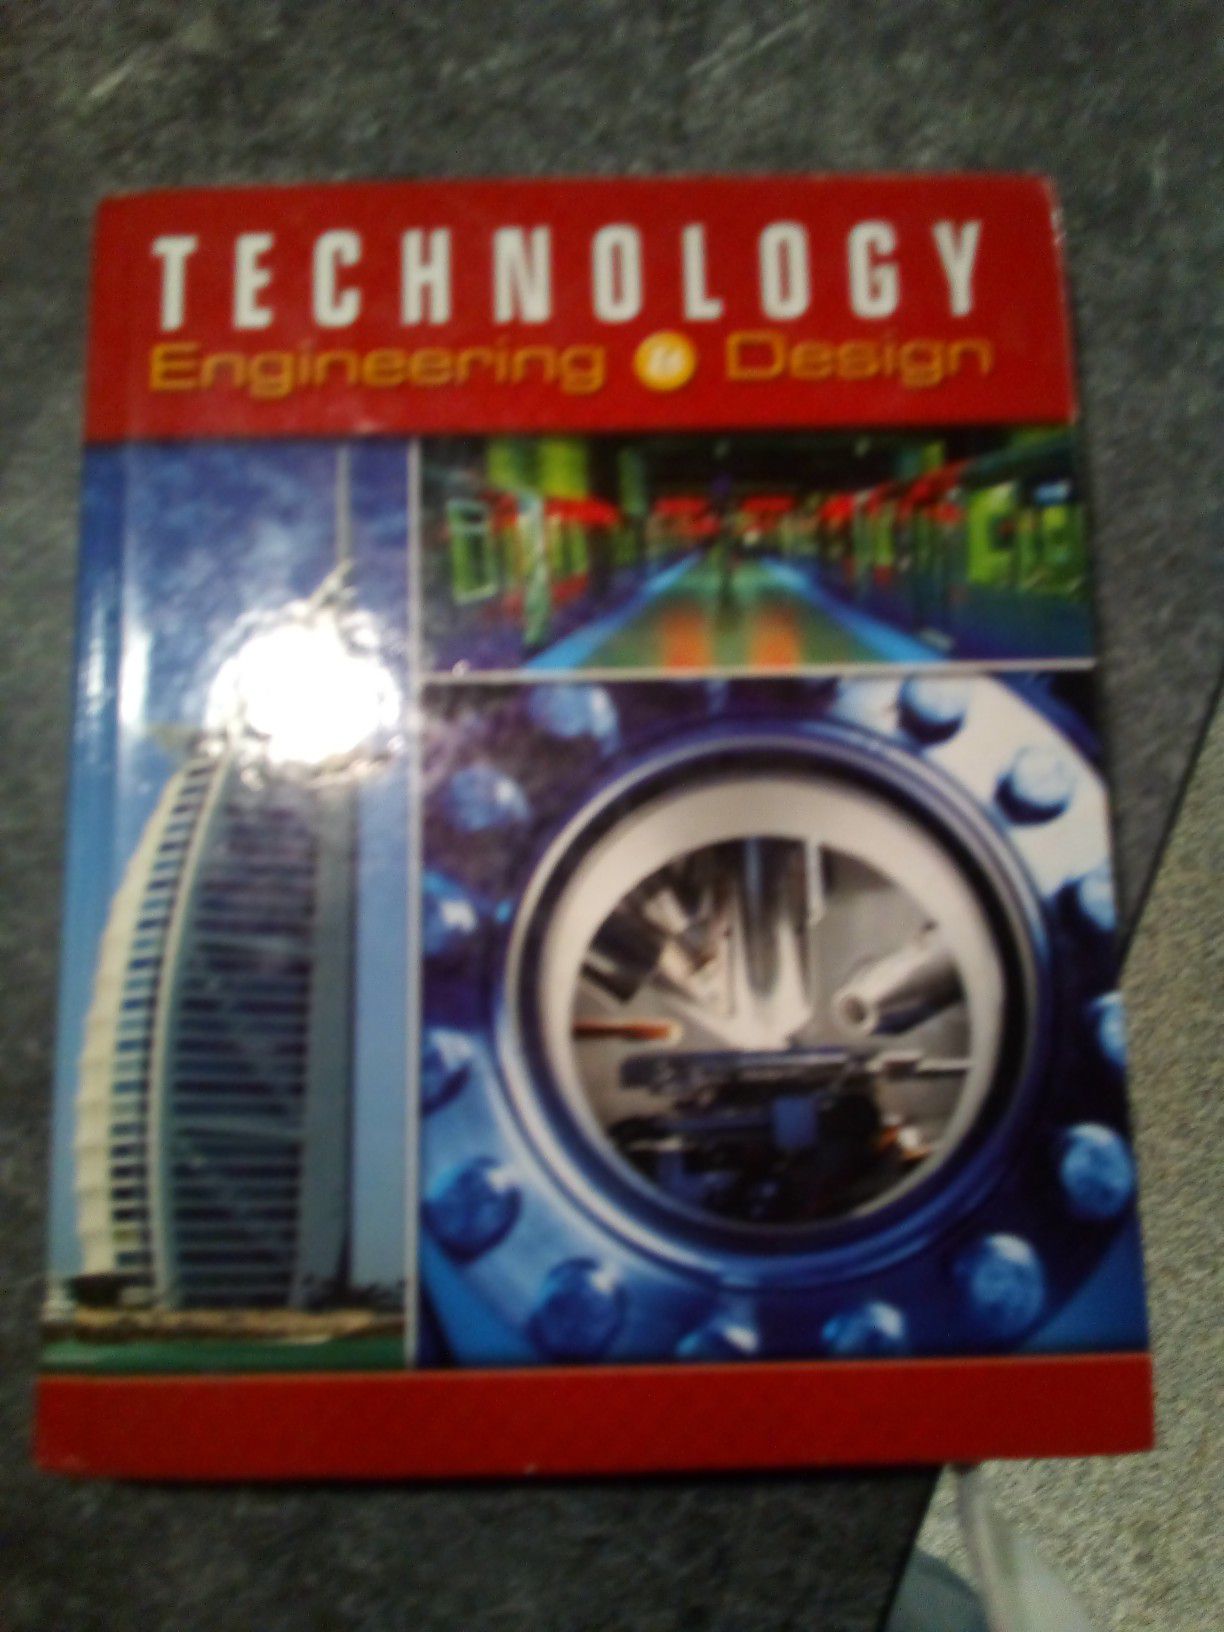 Photo Used but in great condition. Its a college text book. I no longer need it so just looking to get rid of it. Willing to change price.